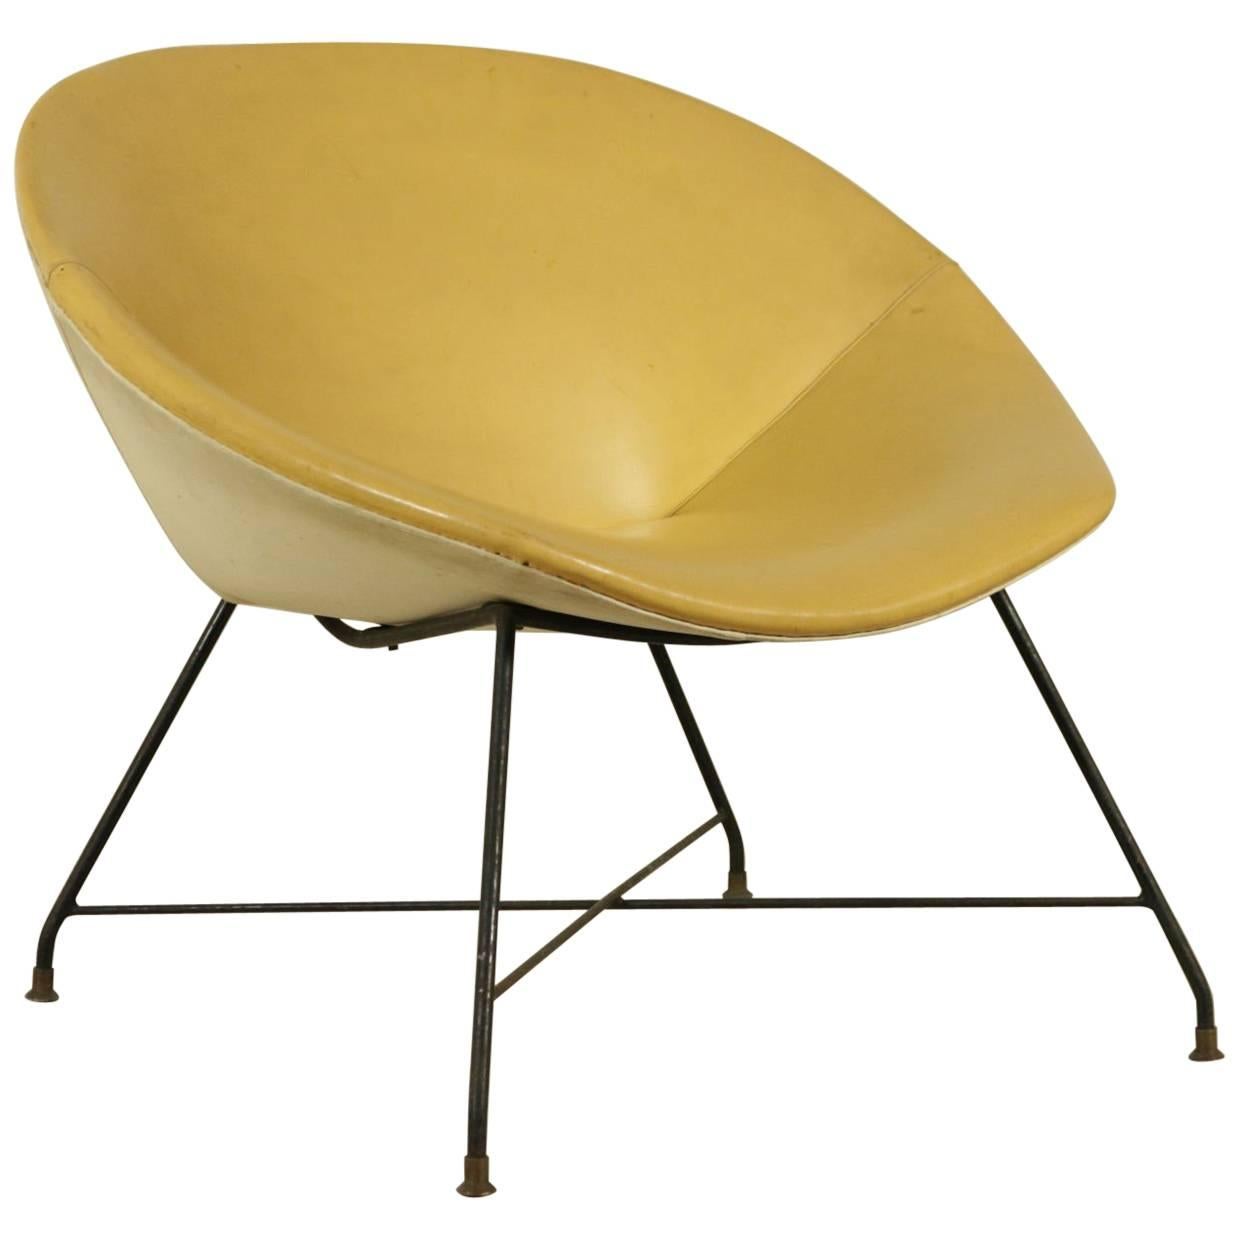 Armchair by Augusto Bozzi for Saporiti Metal Brass Leatherette Vintage, Italy